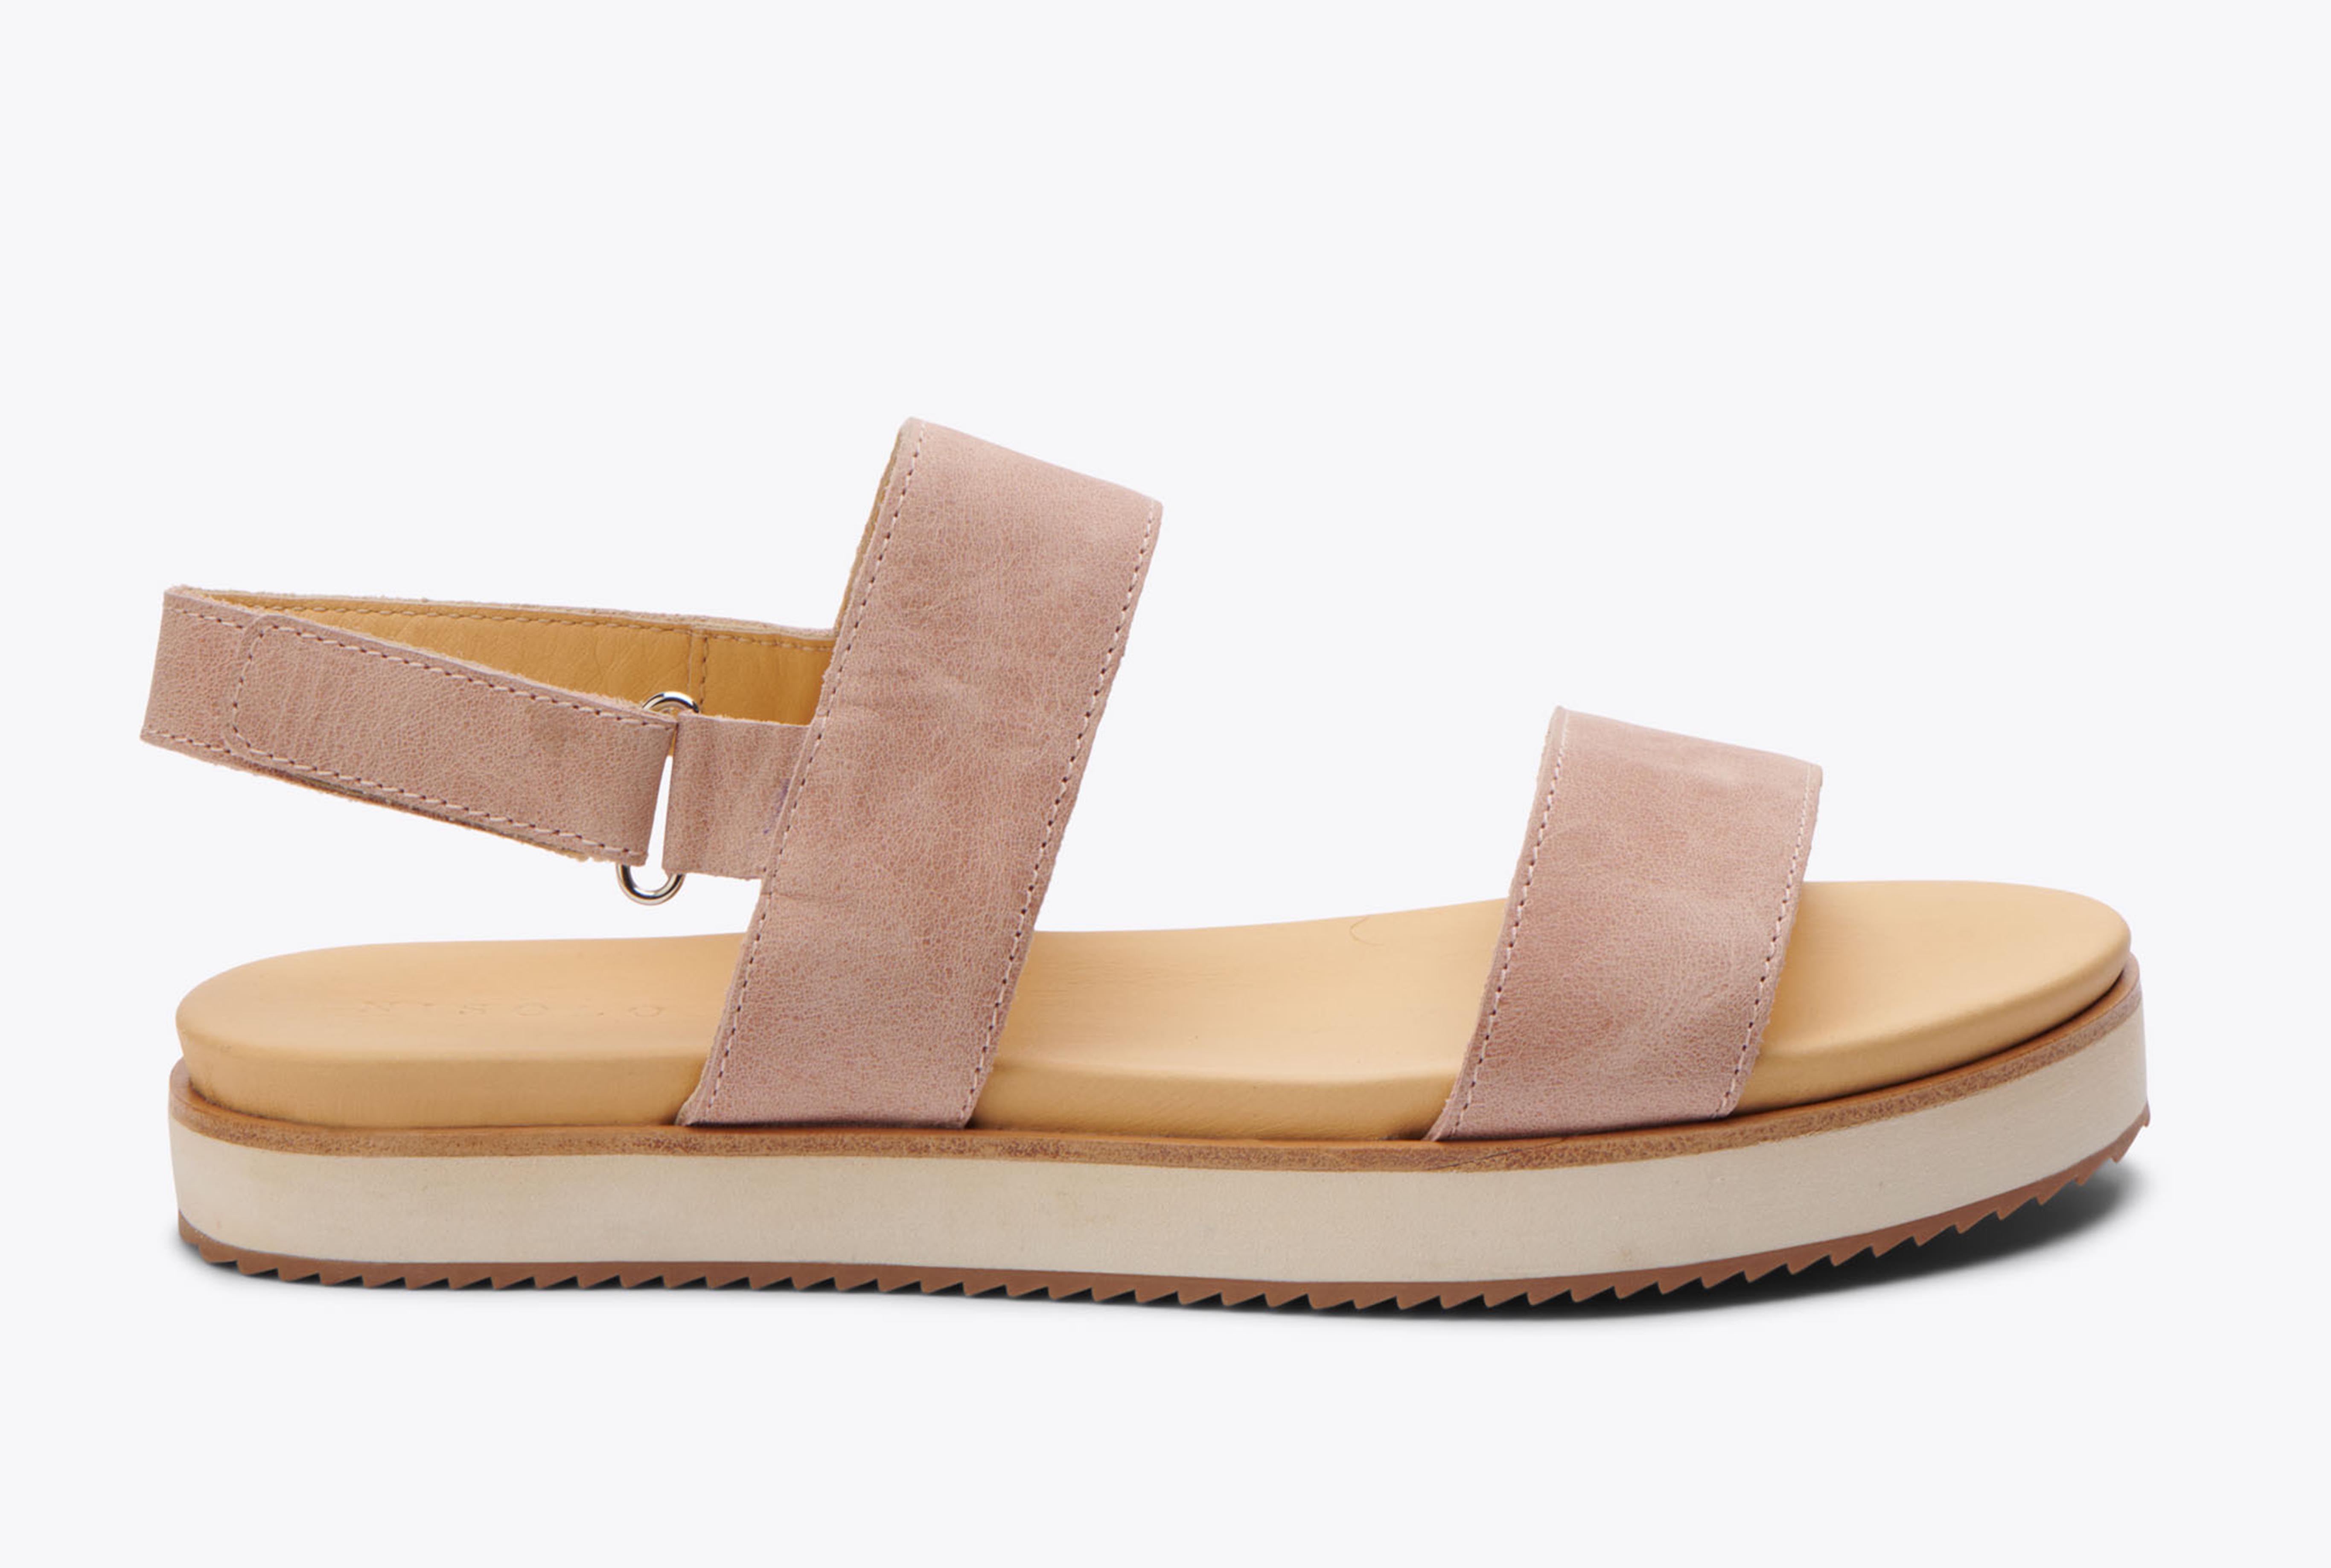 Nisolo Go-To Flatform Sandal Desert Rose - Every Nisolo product is built on the foundation of comfort, function, and design. 